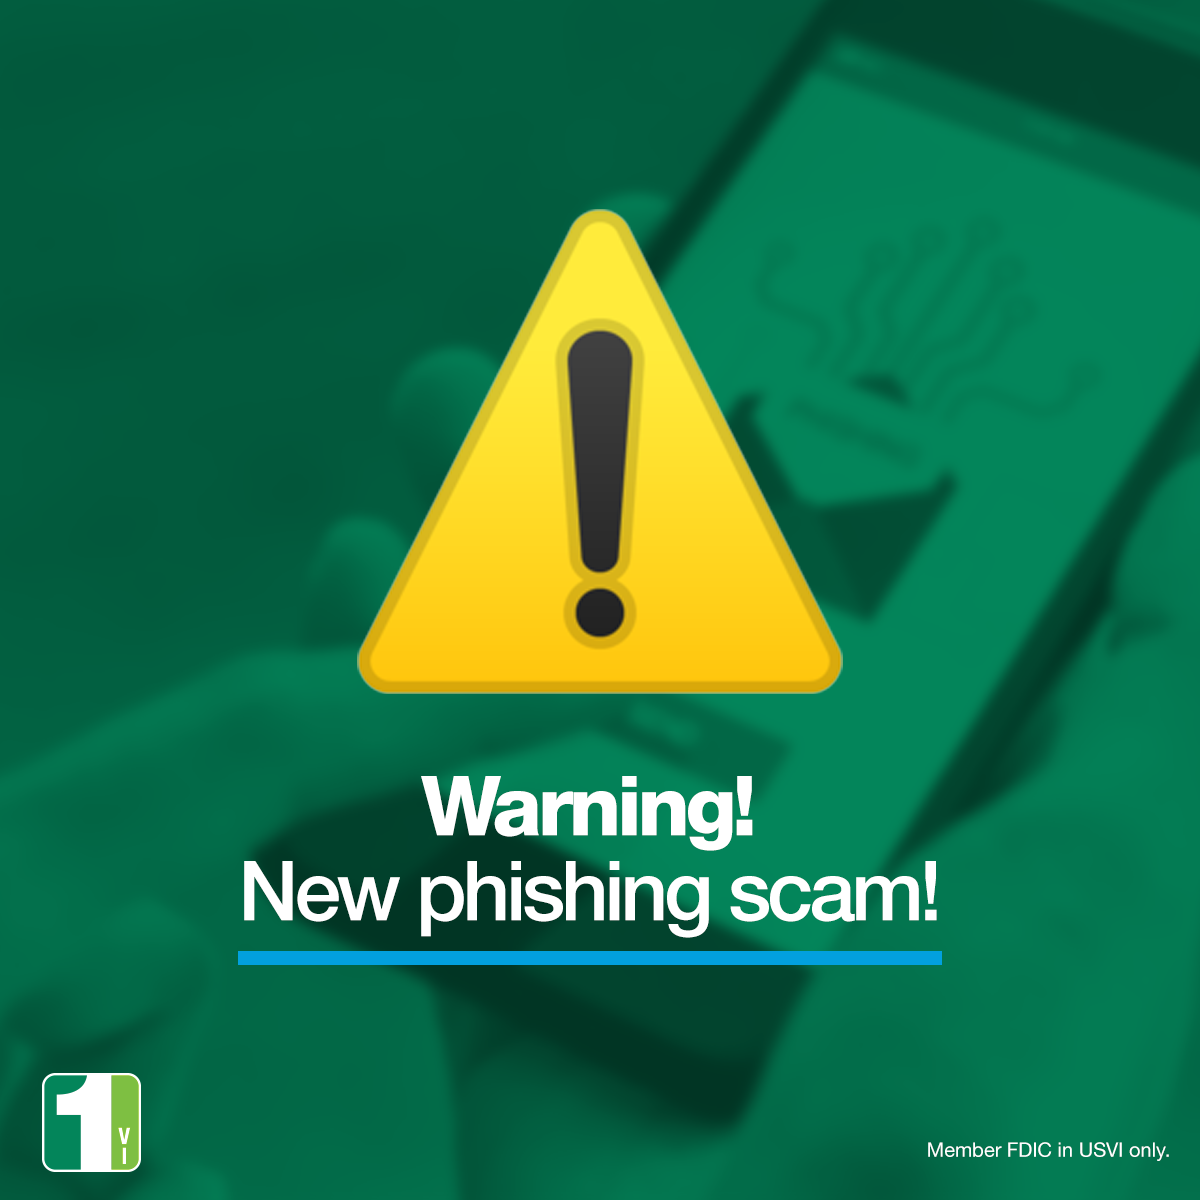 FirstBank V.I. Warns Customers About Second Phishing Scam Making The Rounds In USVI, BVI